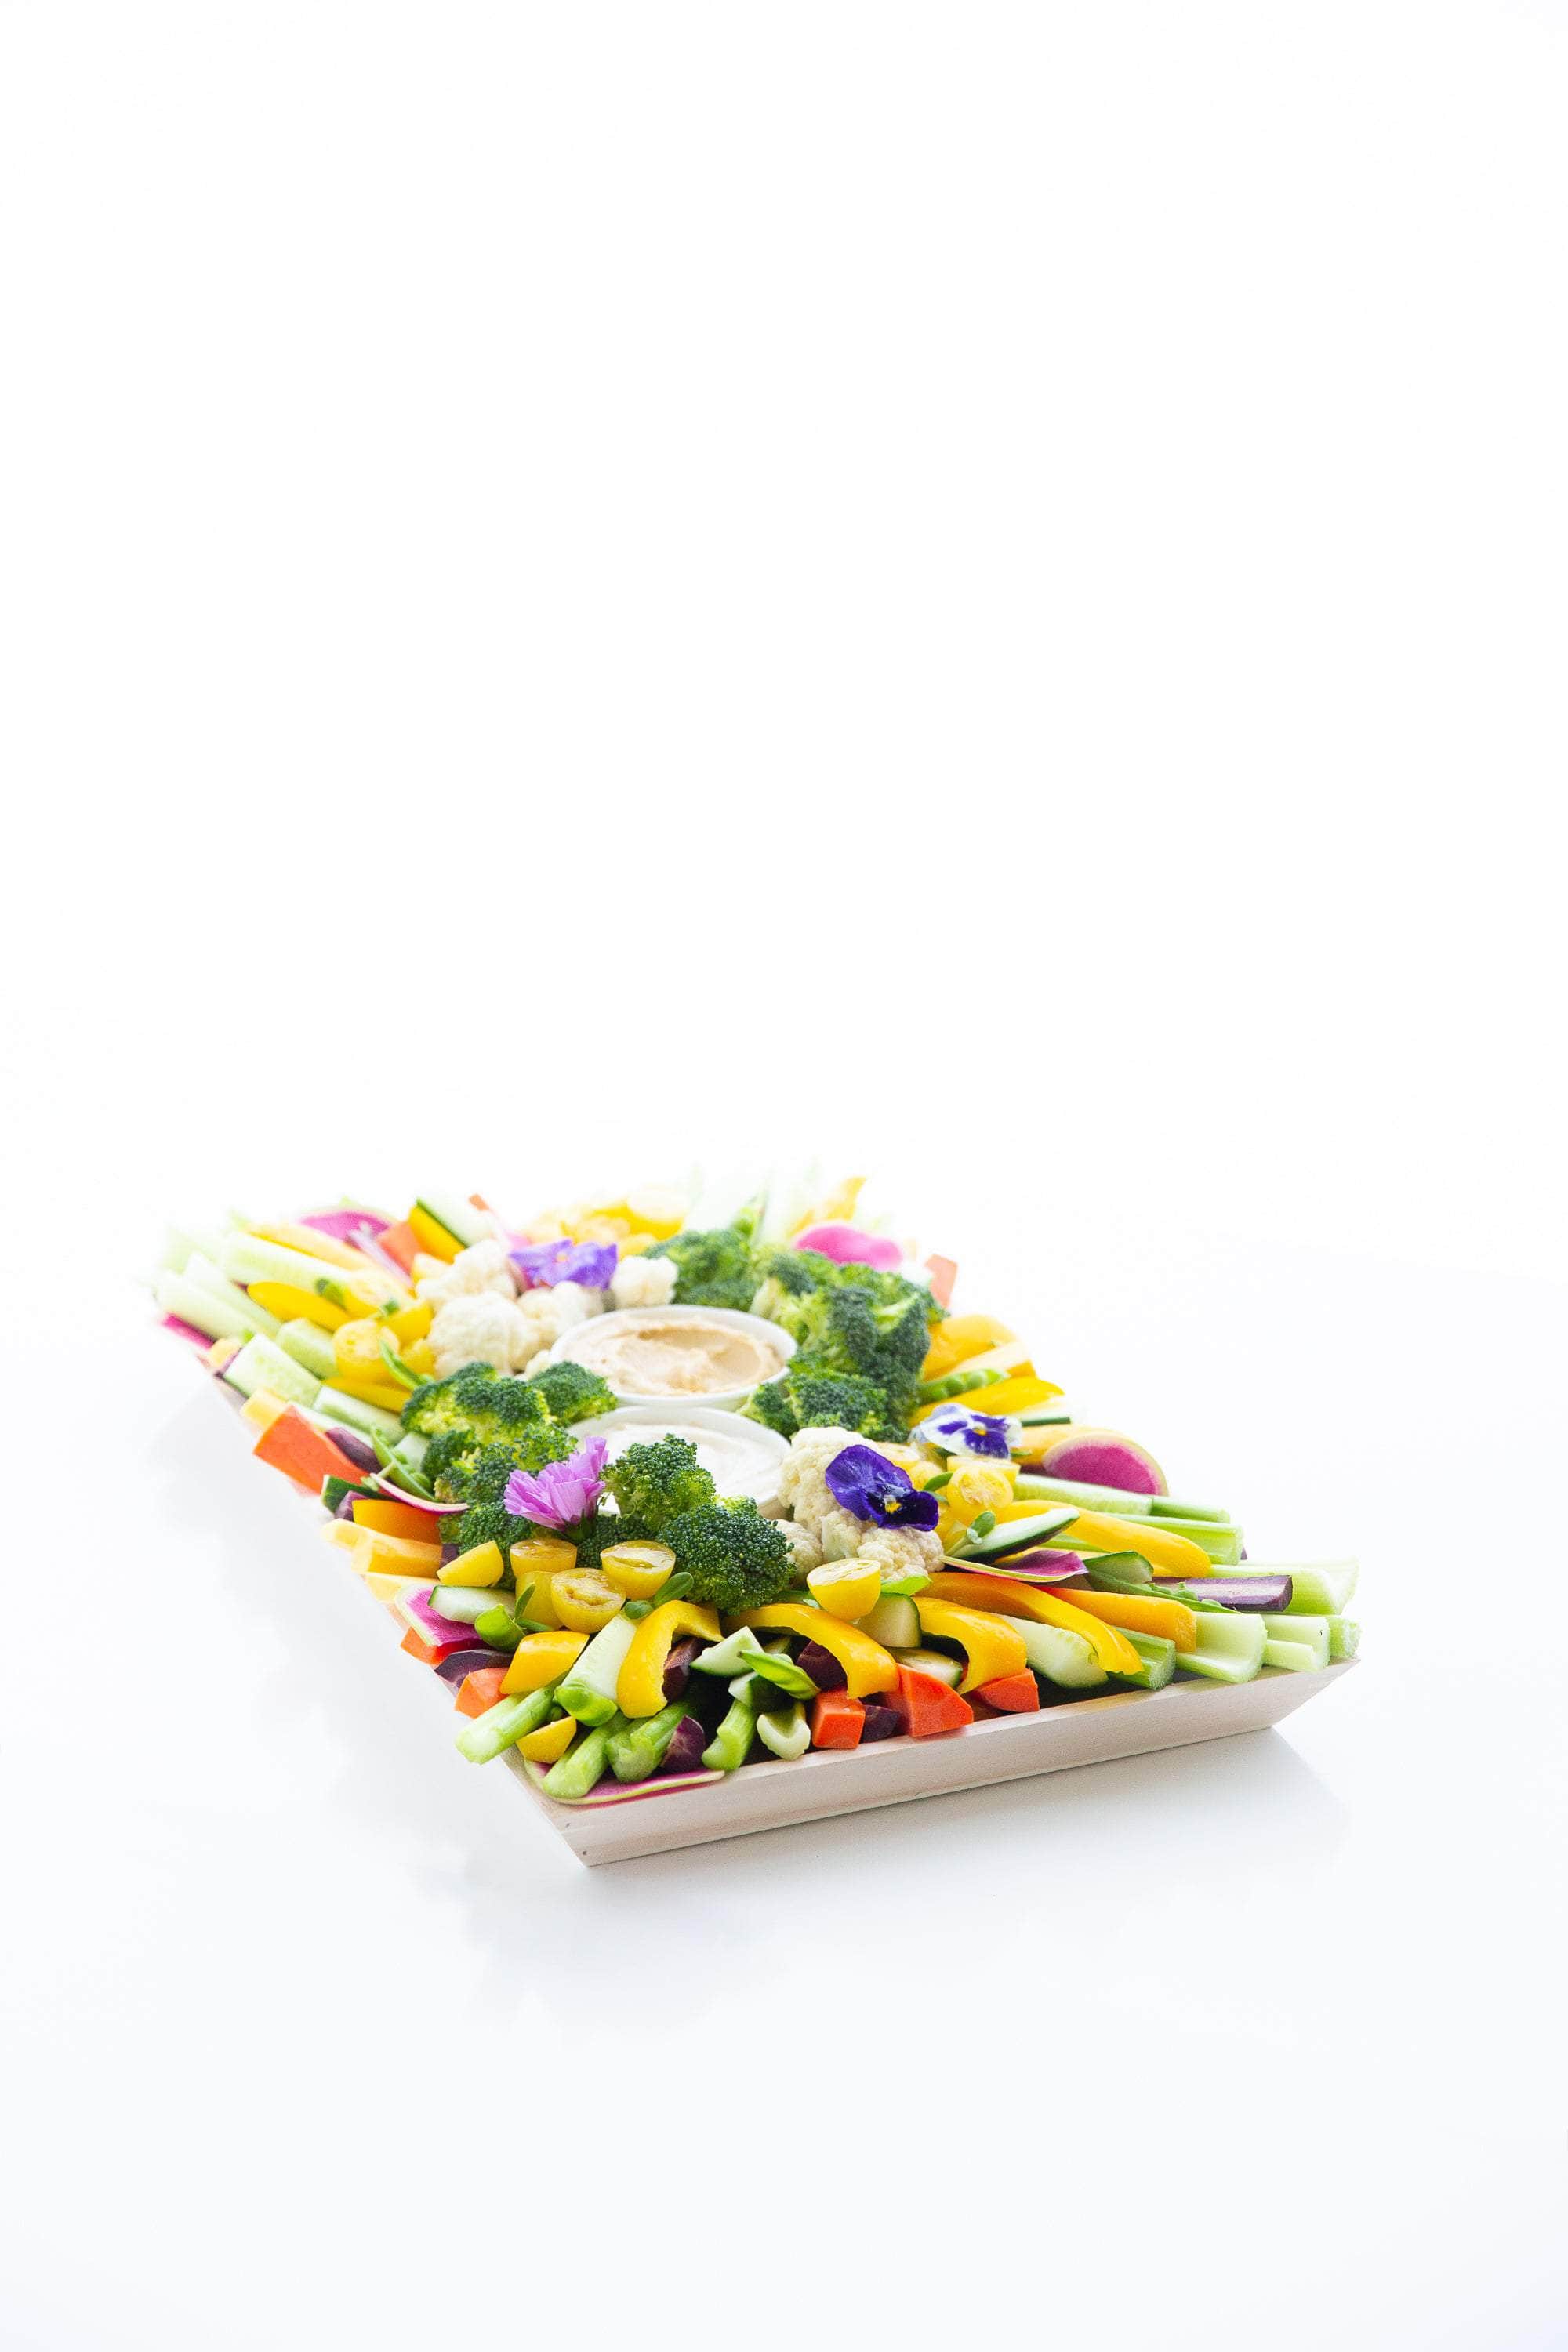 New crudite platter for delivery The Graze Anatomy